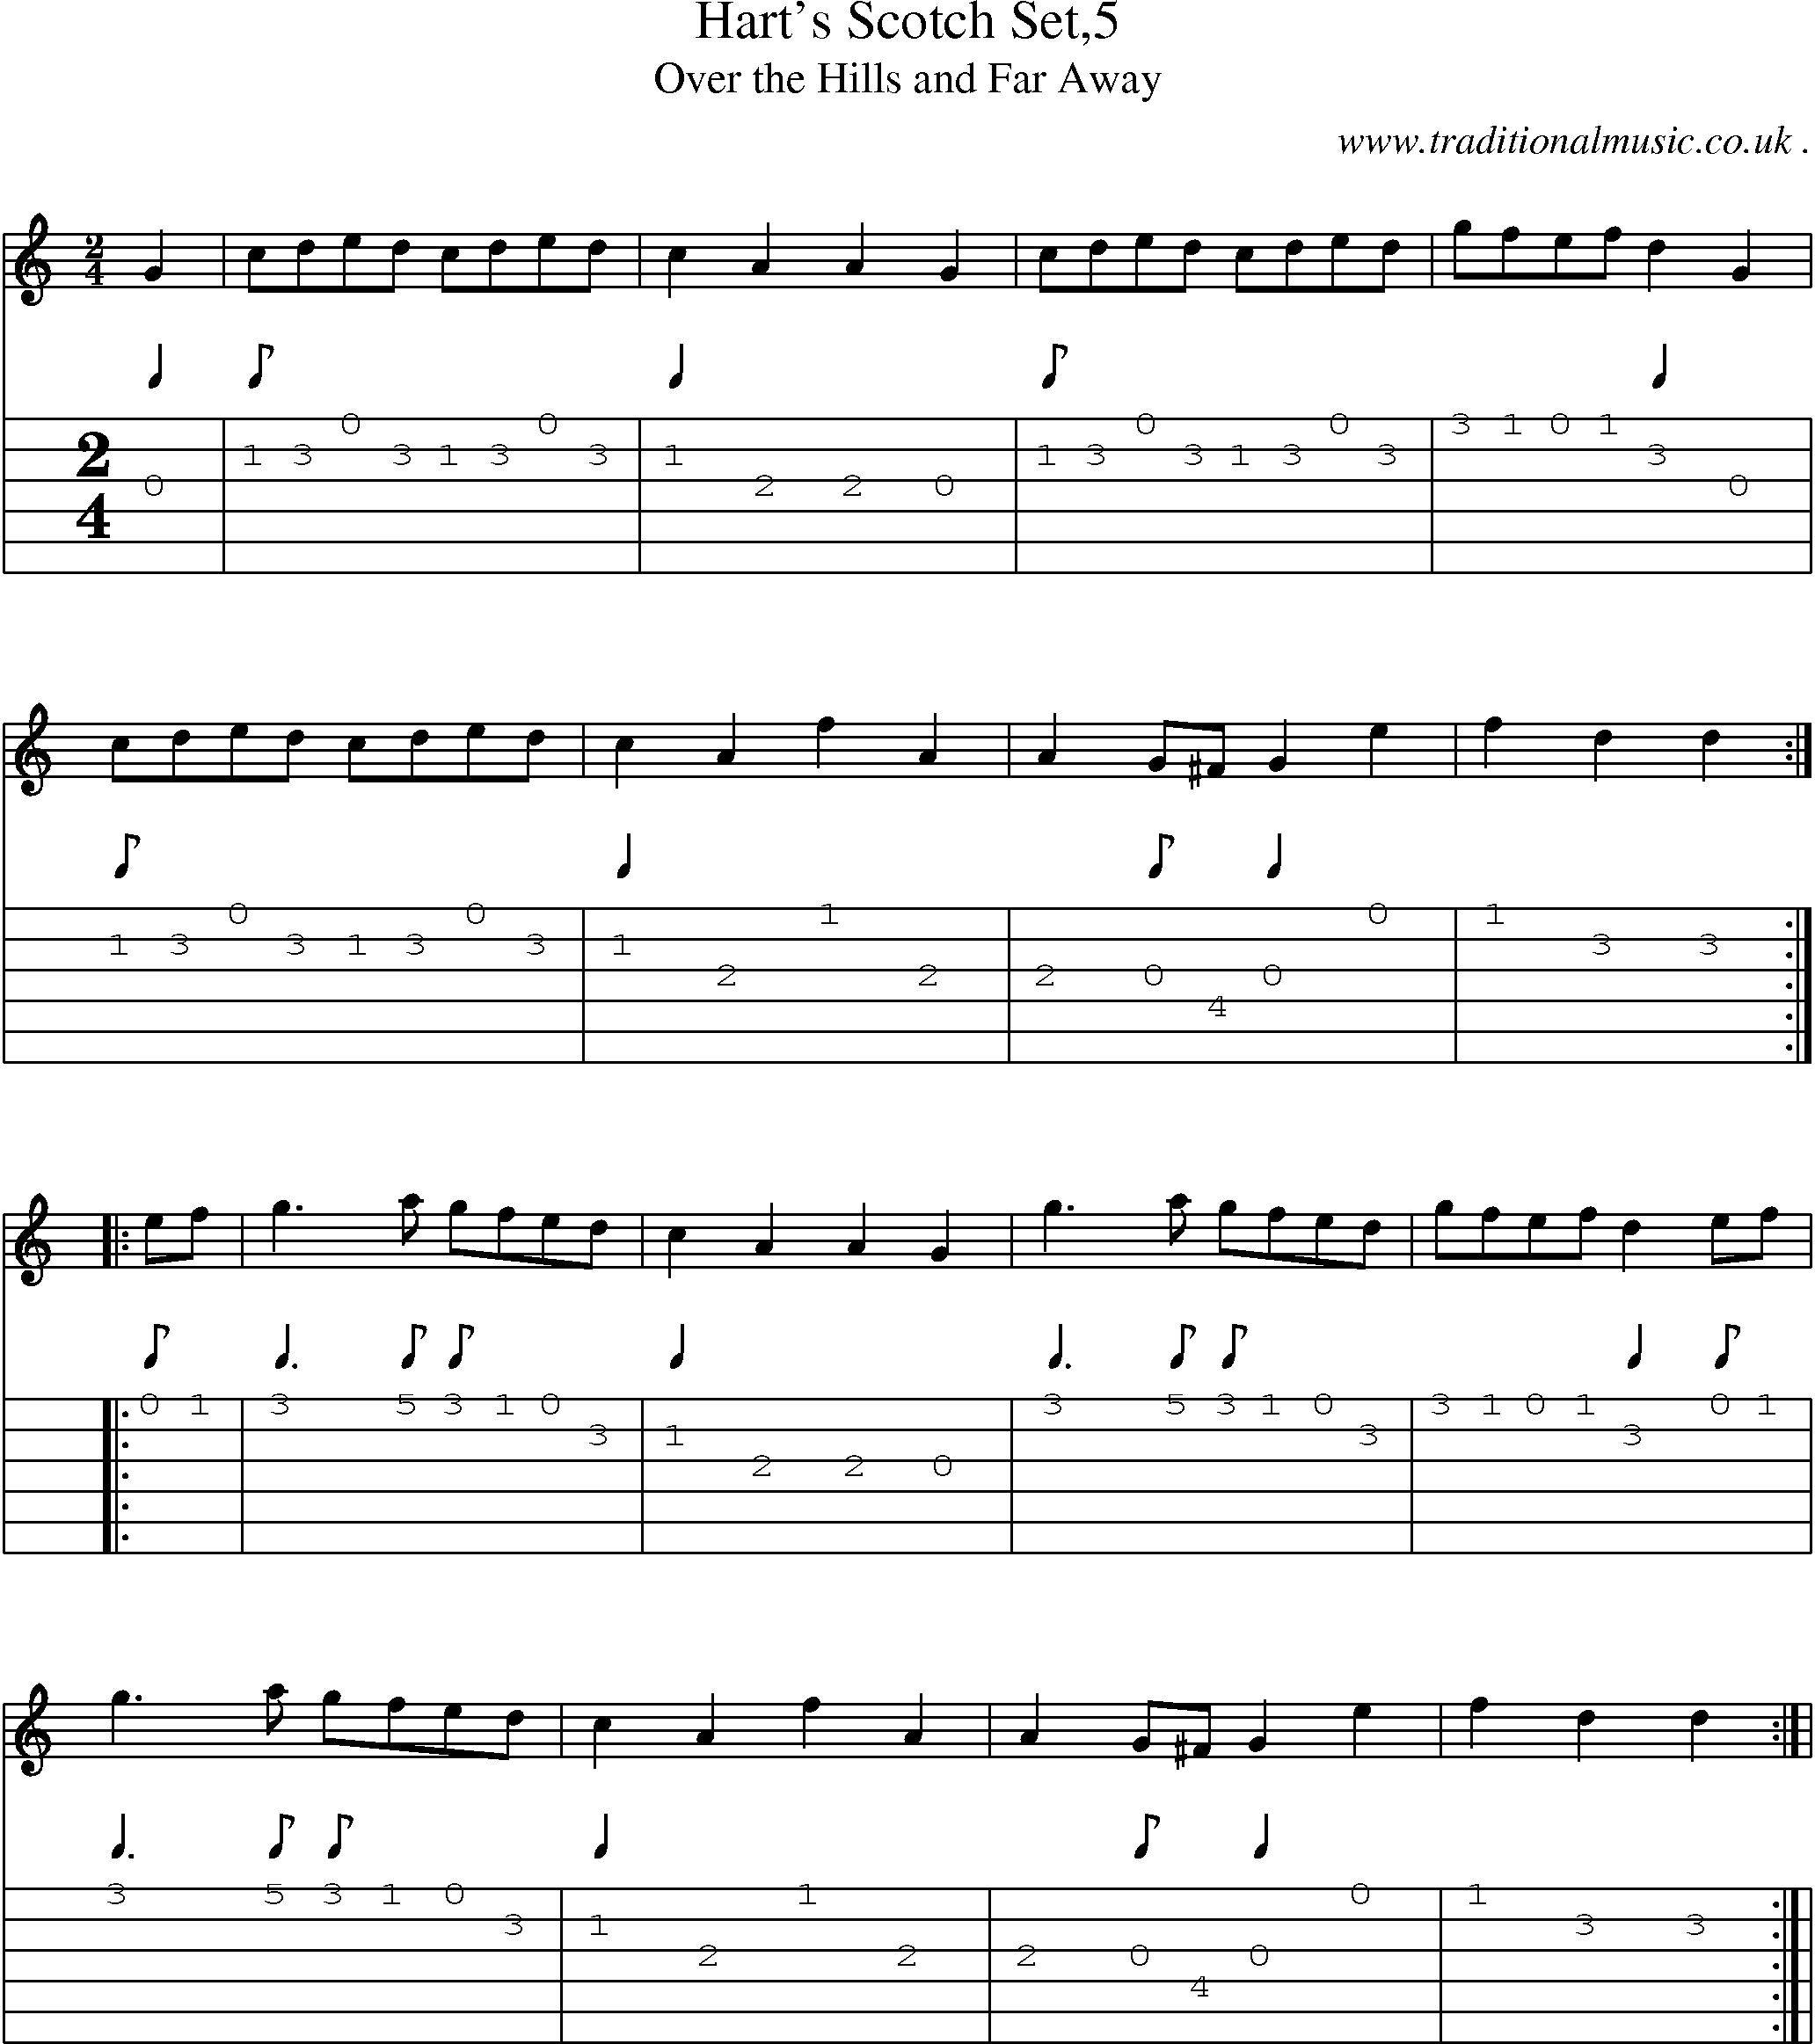 Sheet-Music and Guitar Tabs for Harts Scotch Set5